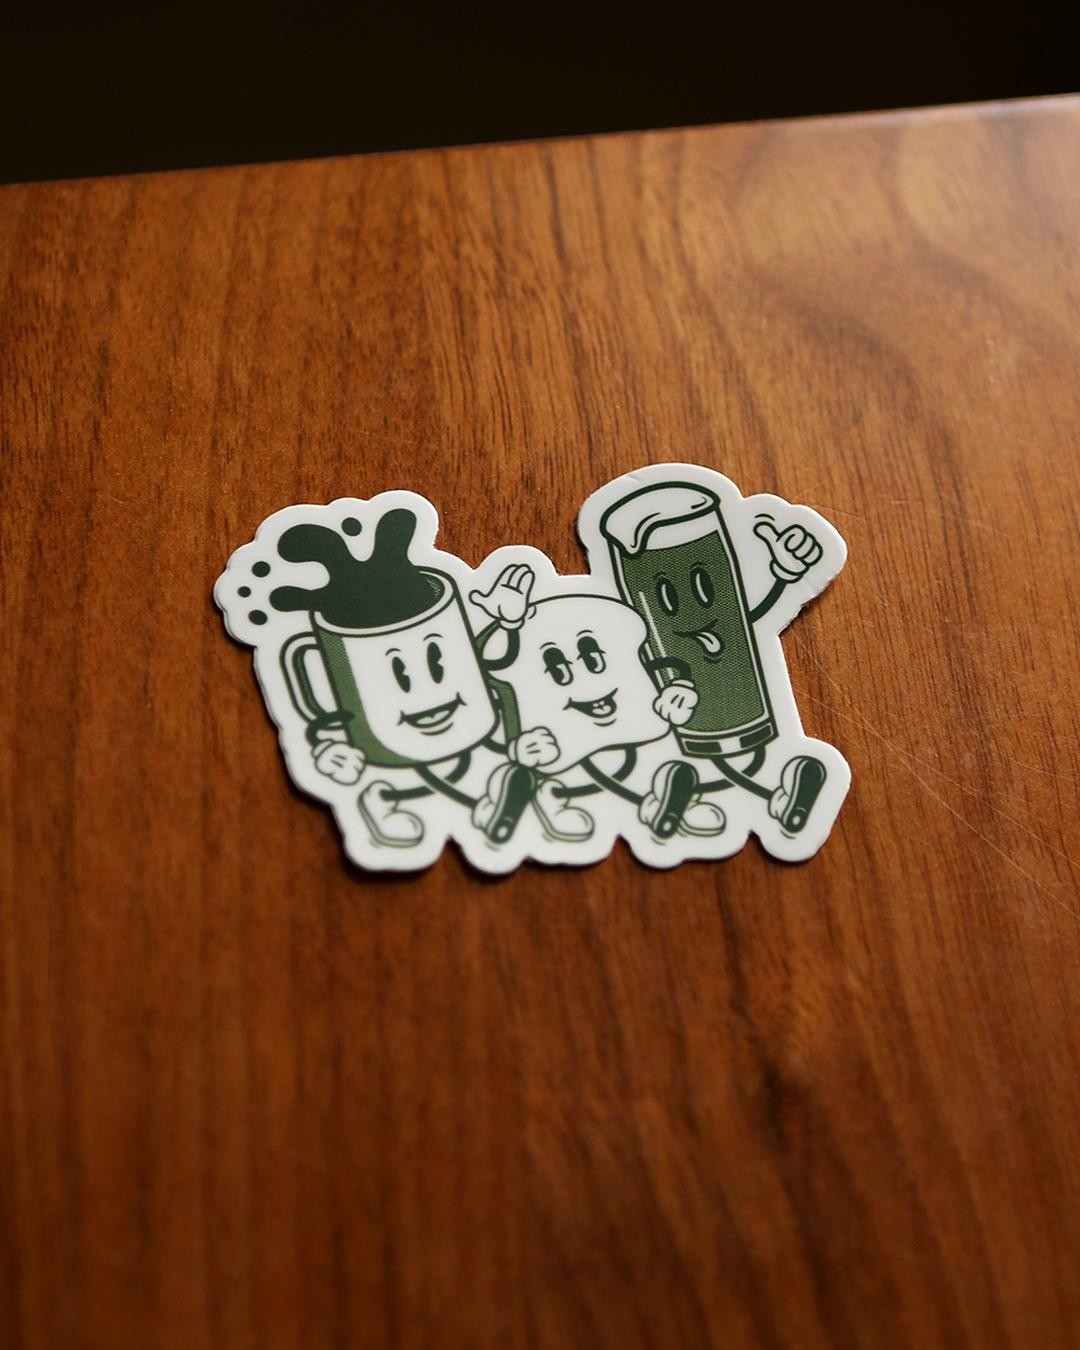 The Daily Sticker